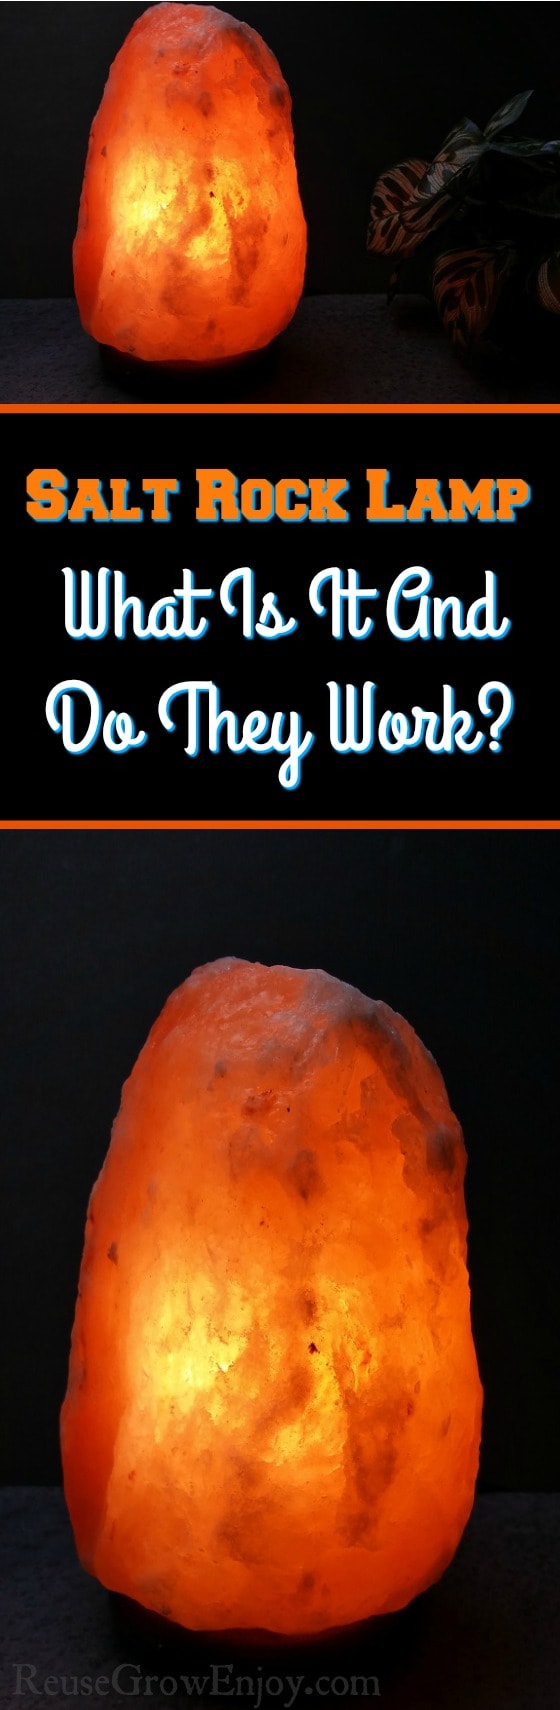 Have you been seeing salt rock lamps and wondering what they are and if they really work? Check out this post on Salt Rock Lamp - What Is It And Do They Work?